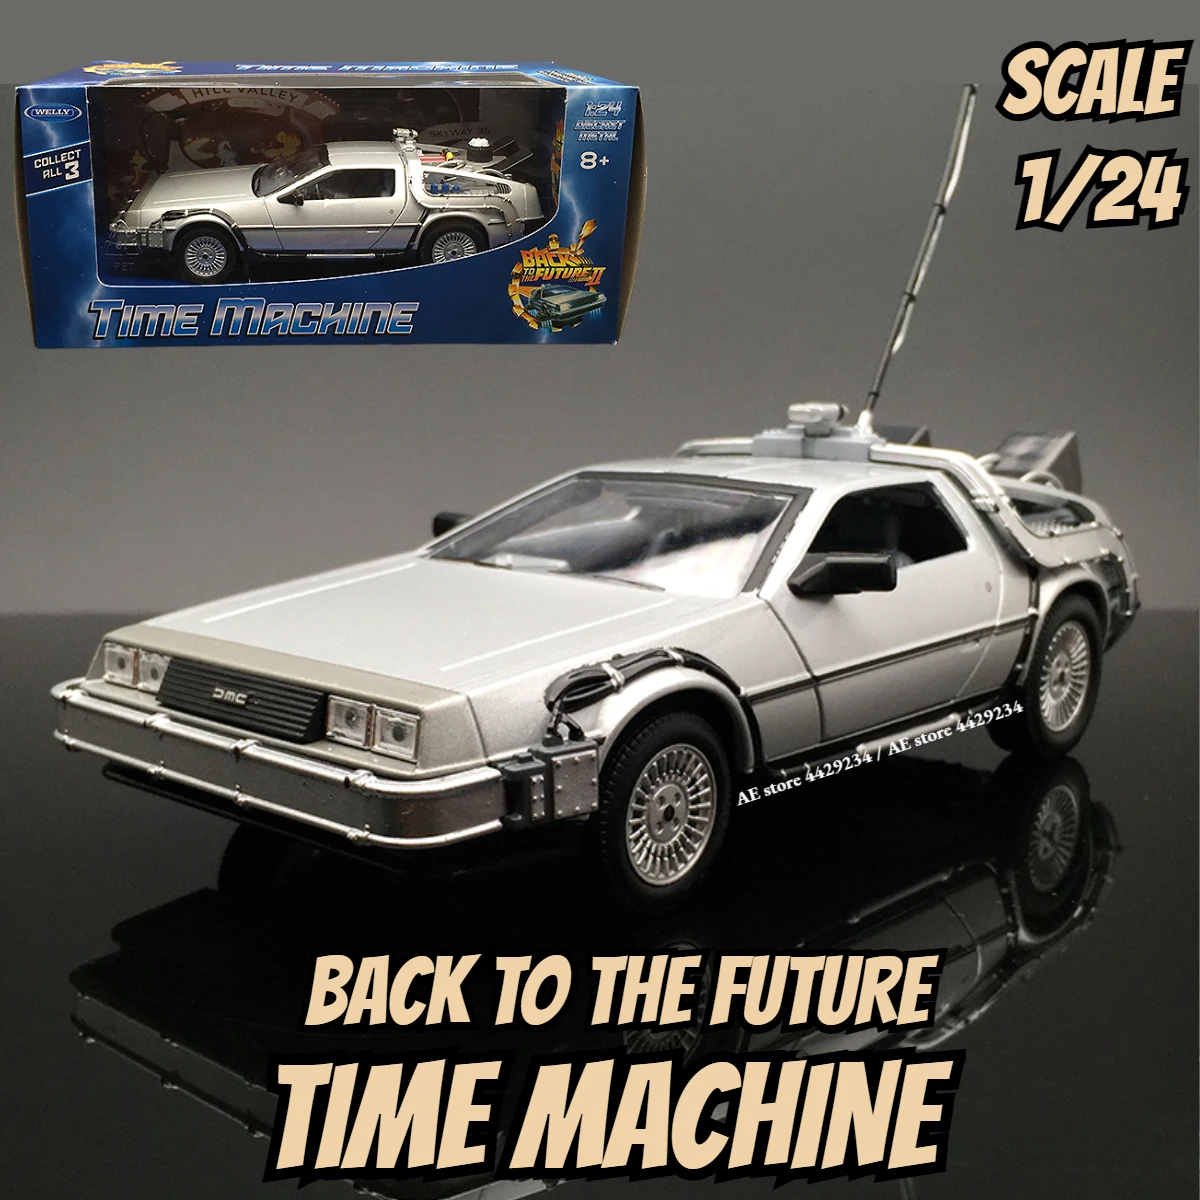 

WELLY 1:24 Delorean DMC-12 Time Machine Back to the Future 1 Movie Car Model Repilca Metal Diecast Kid Toy Miniature for Boy